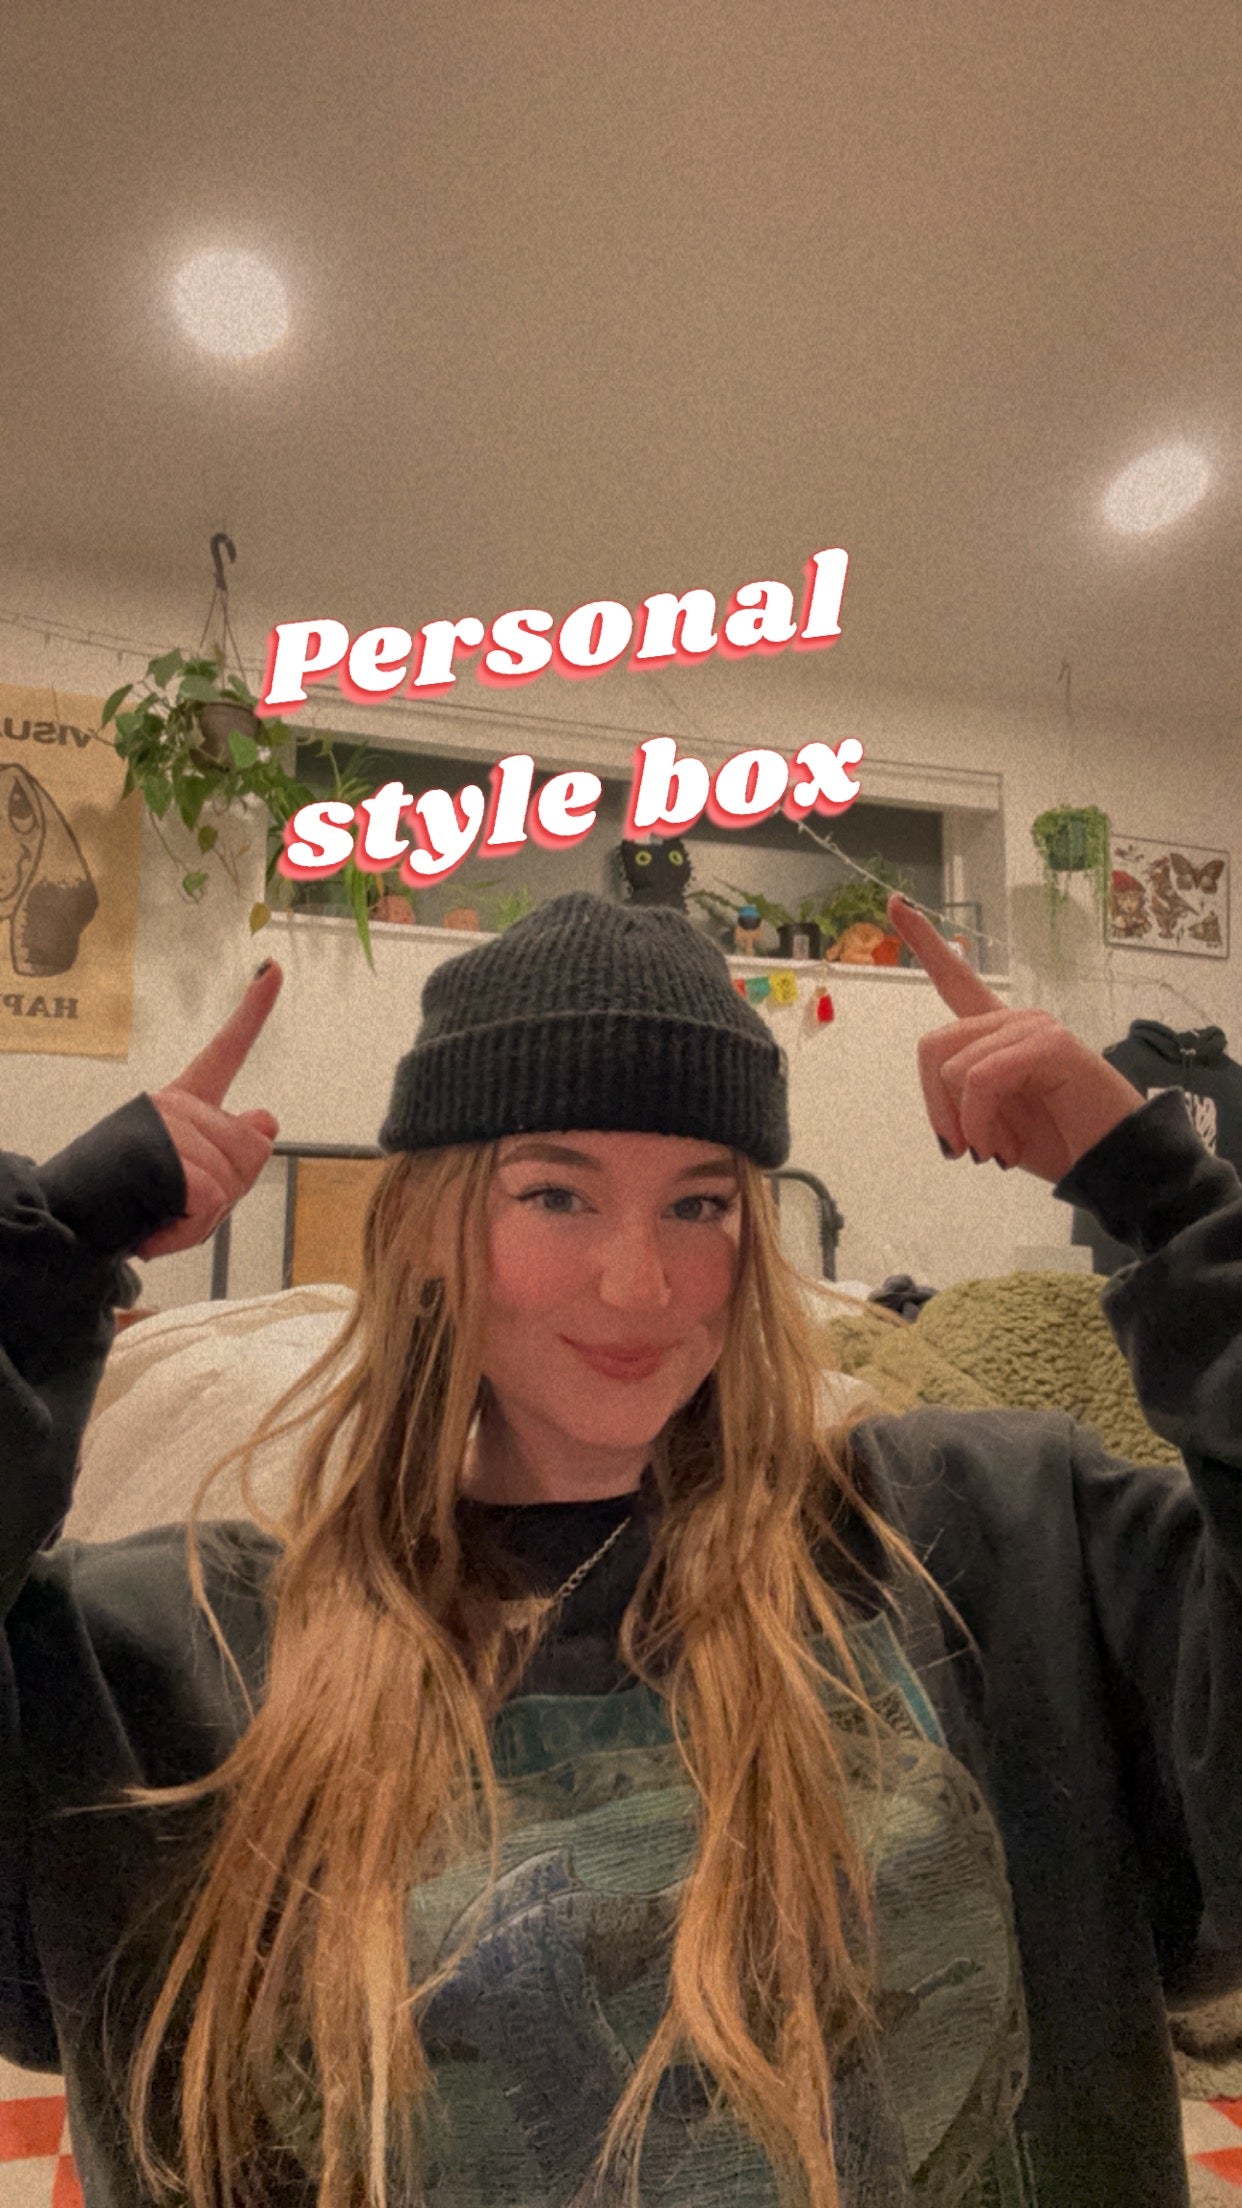 Personal style box